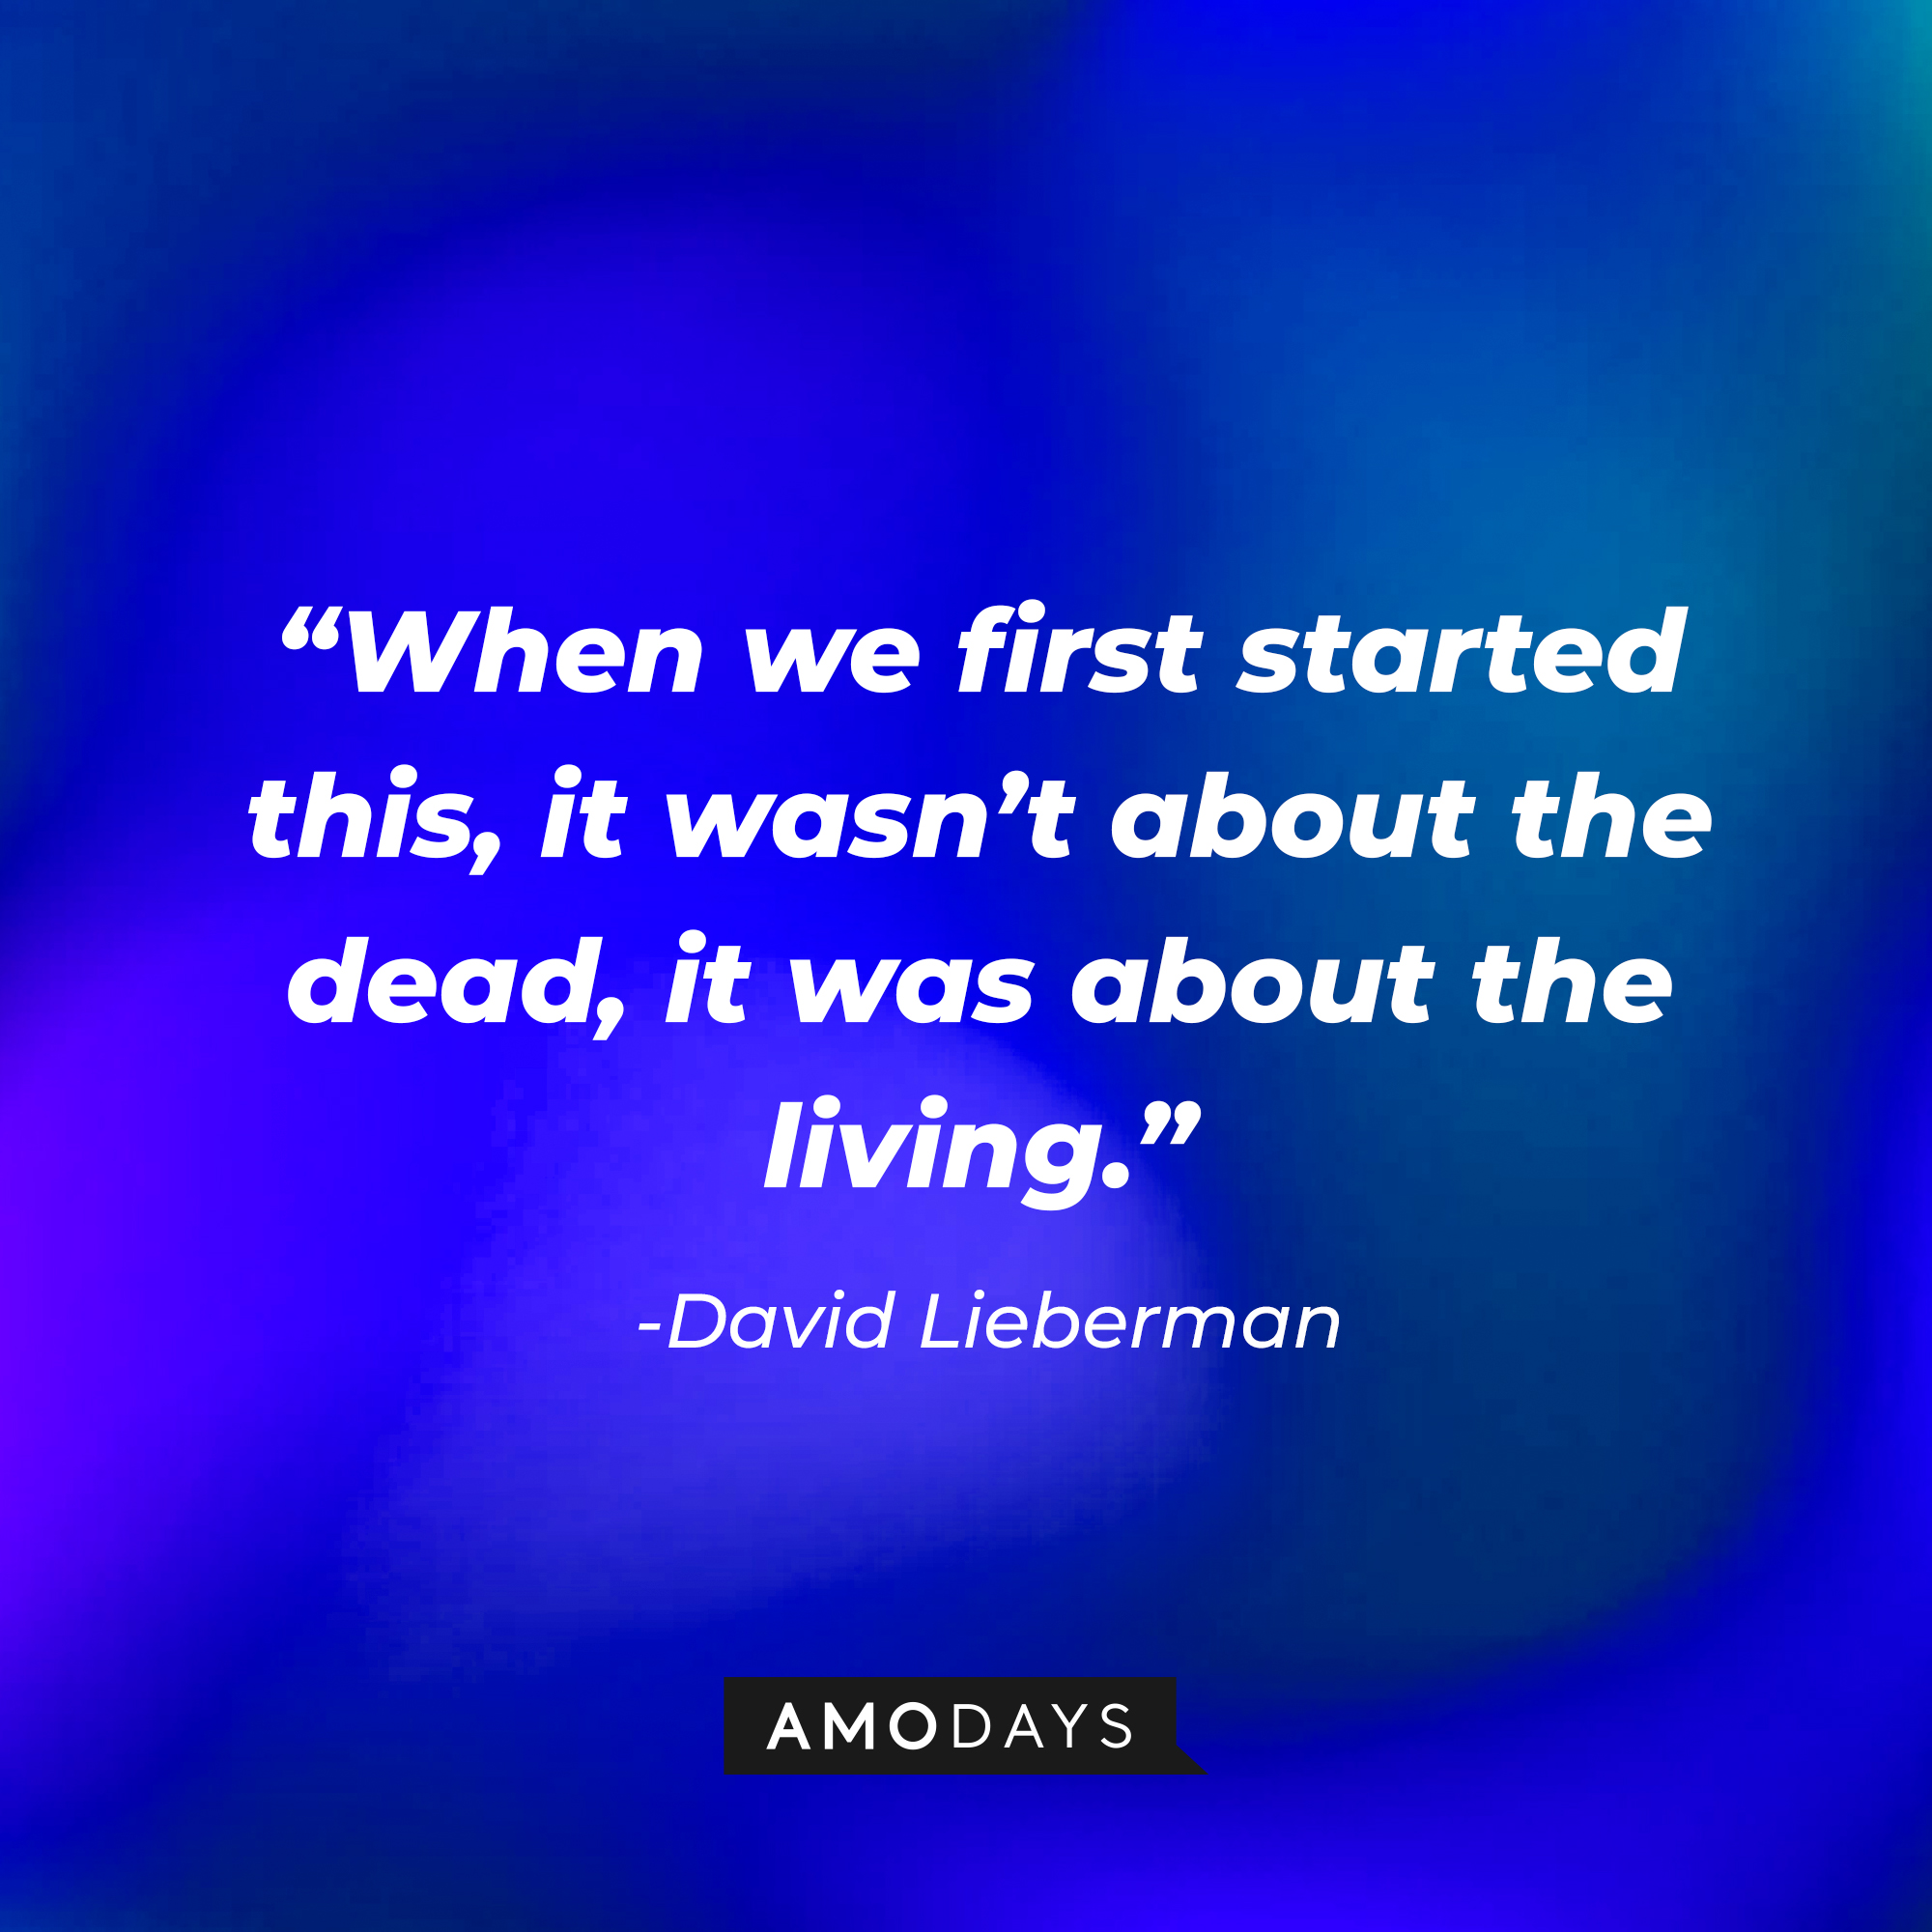 David Liebermans quote: “When we first started this, it wasn’t about the dead, it was about the living.” | Source: AmoDays